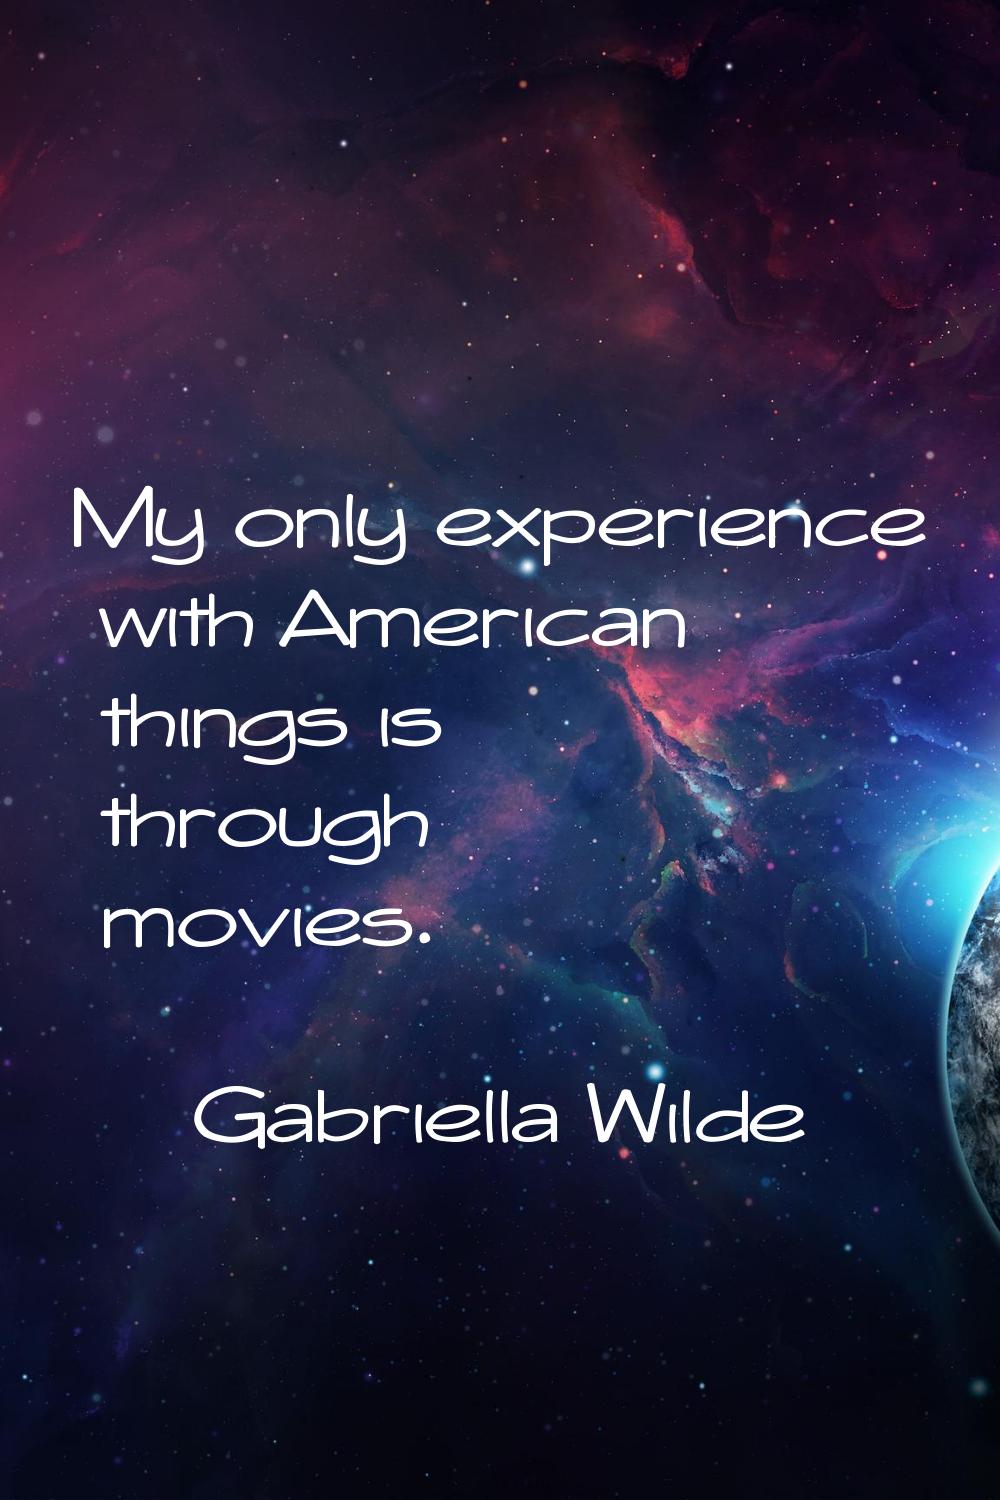 My only experience with American things is through movies.